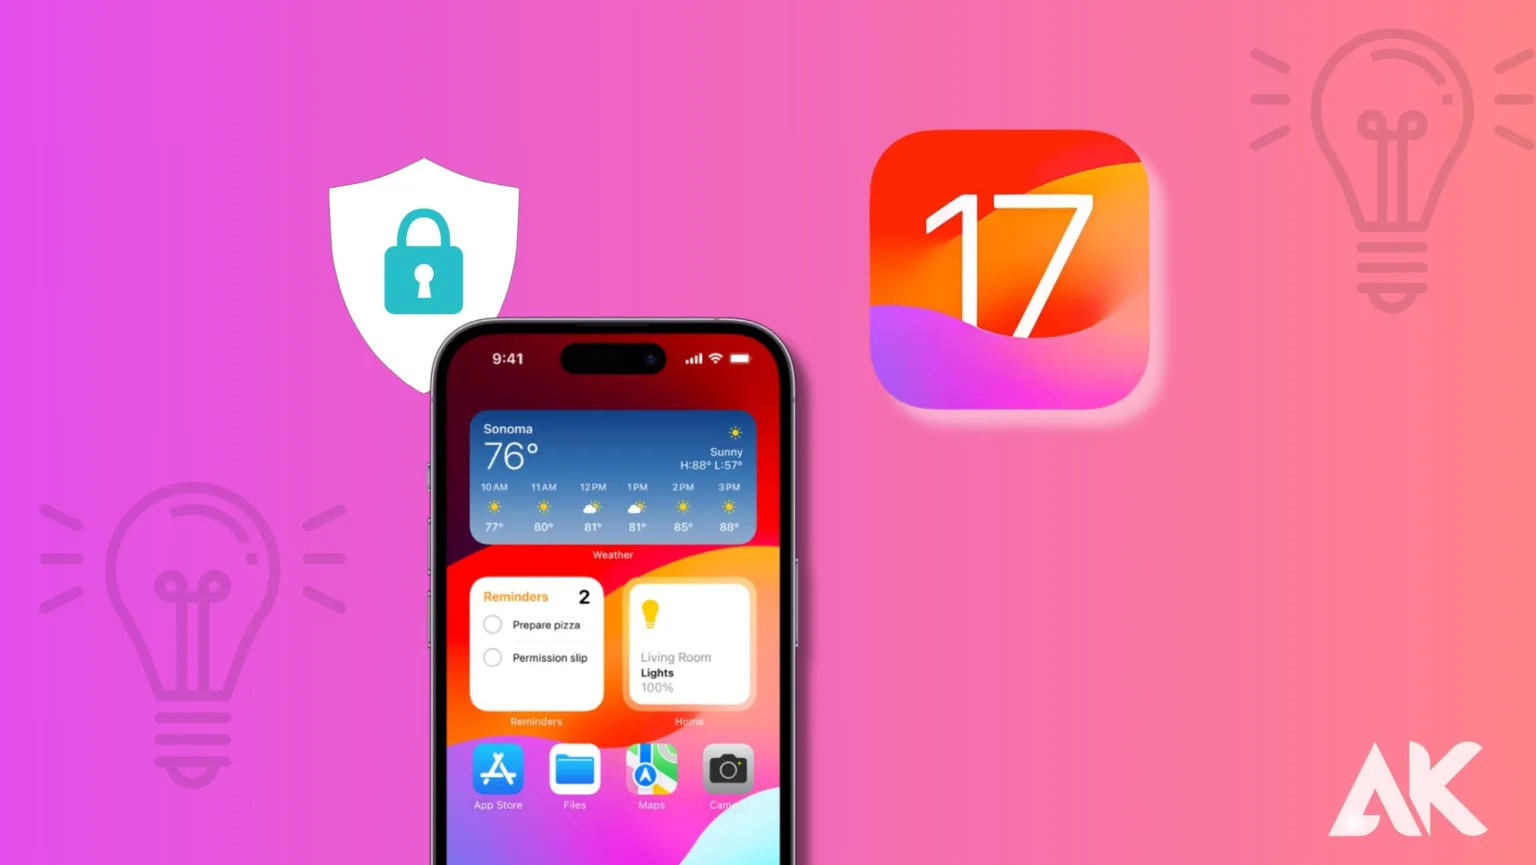 Top Content Safety Tips For iOS 17 - Step by Step